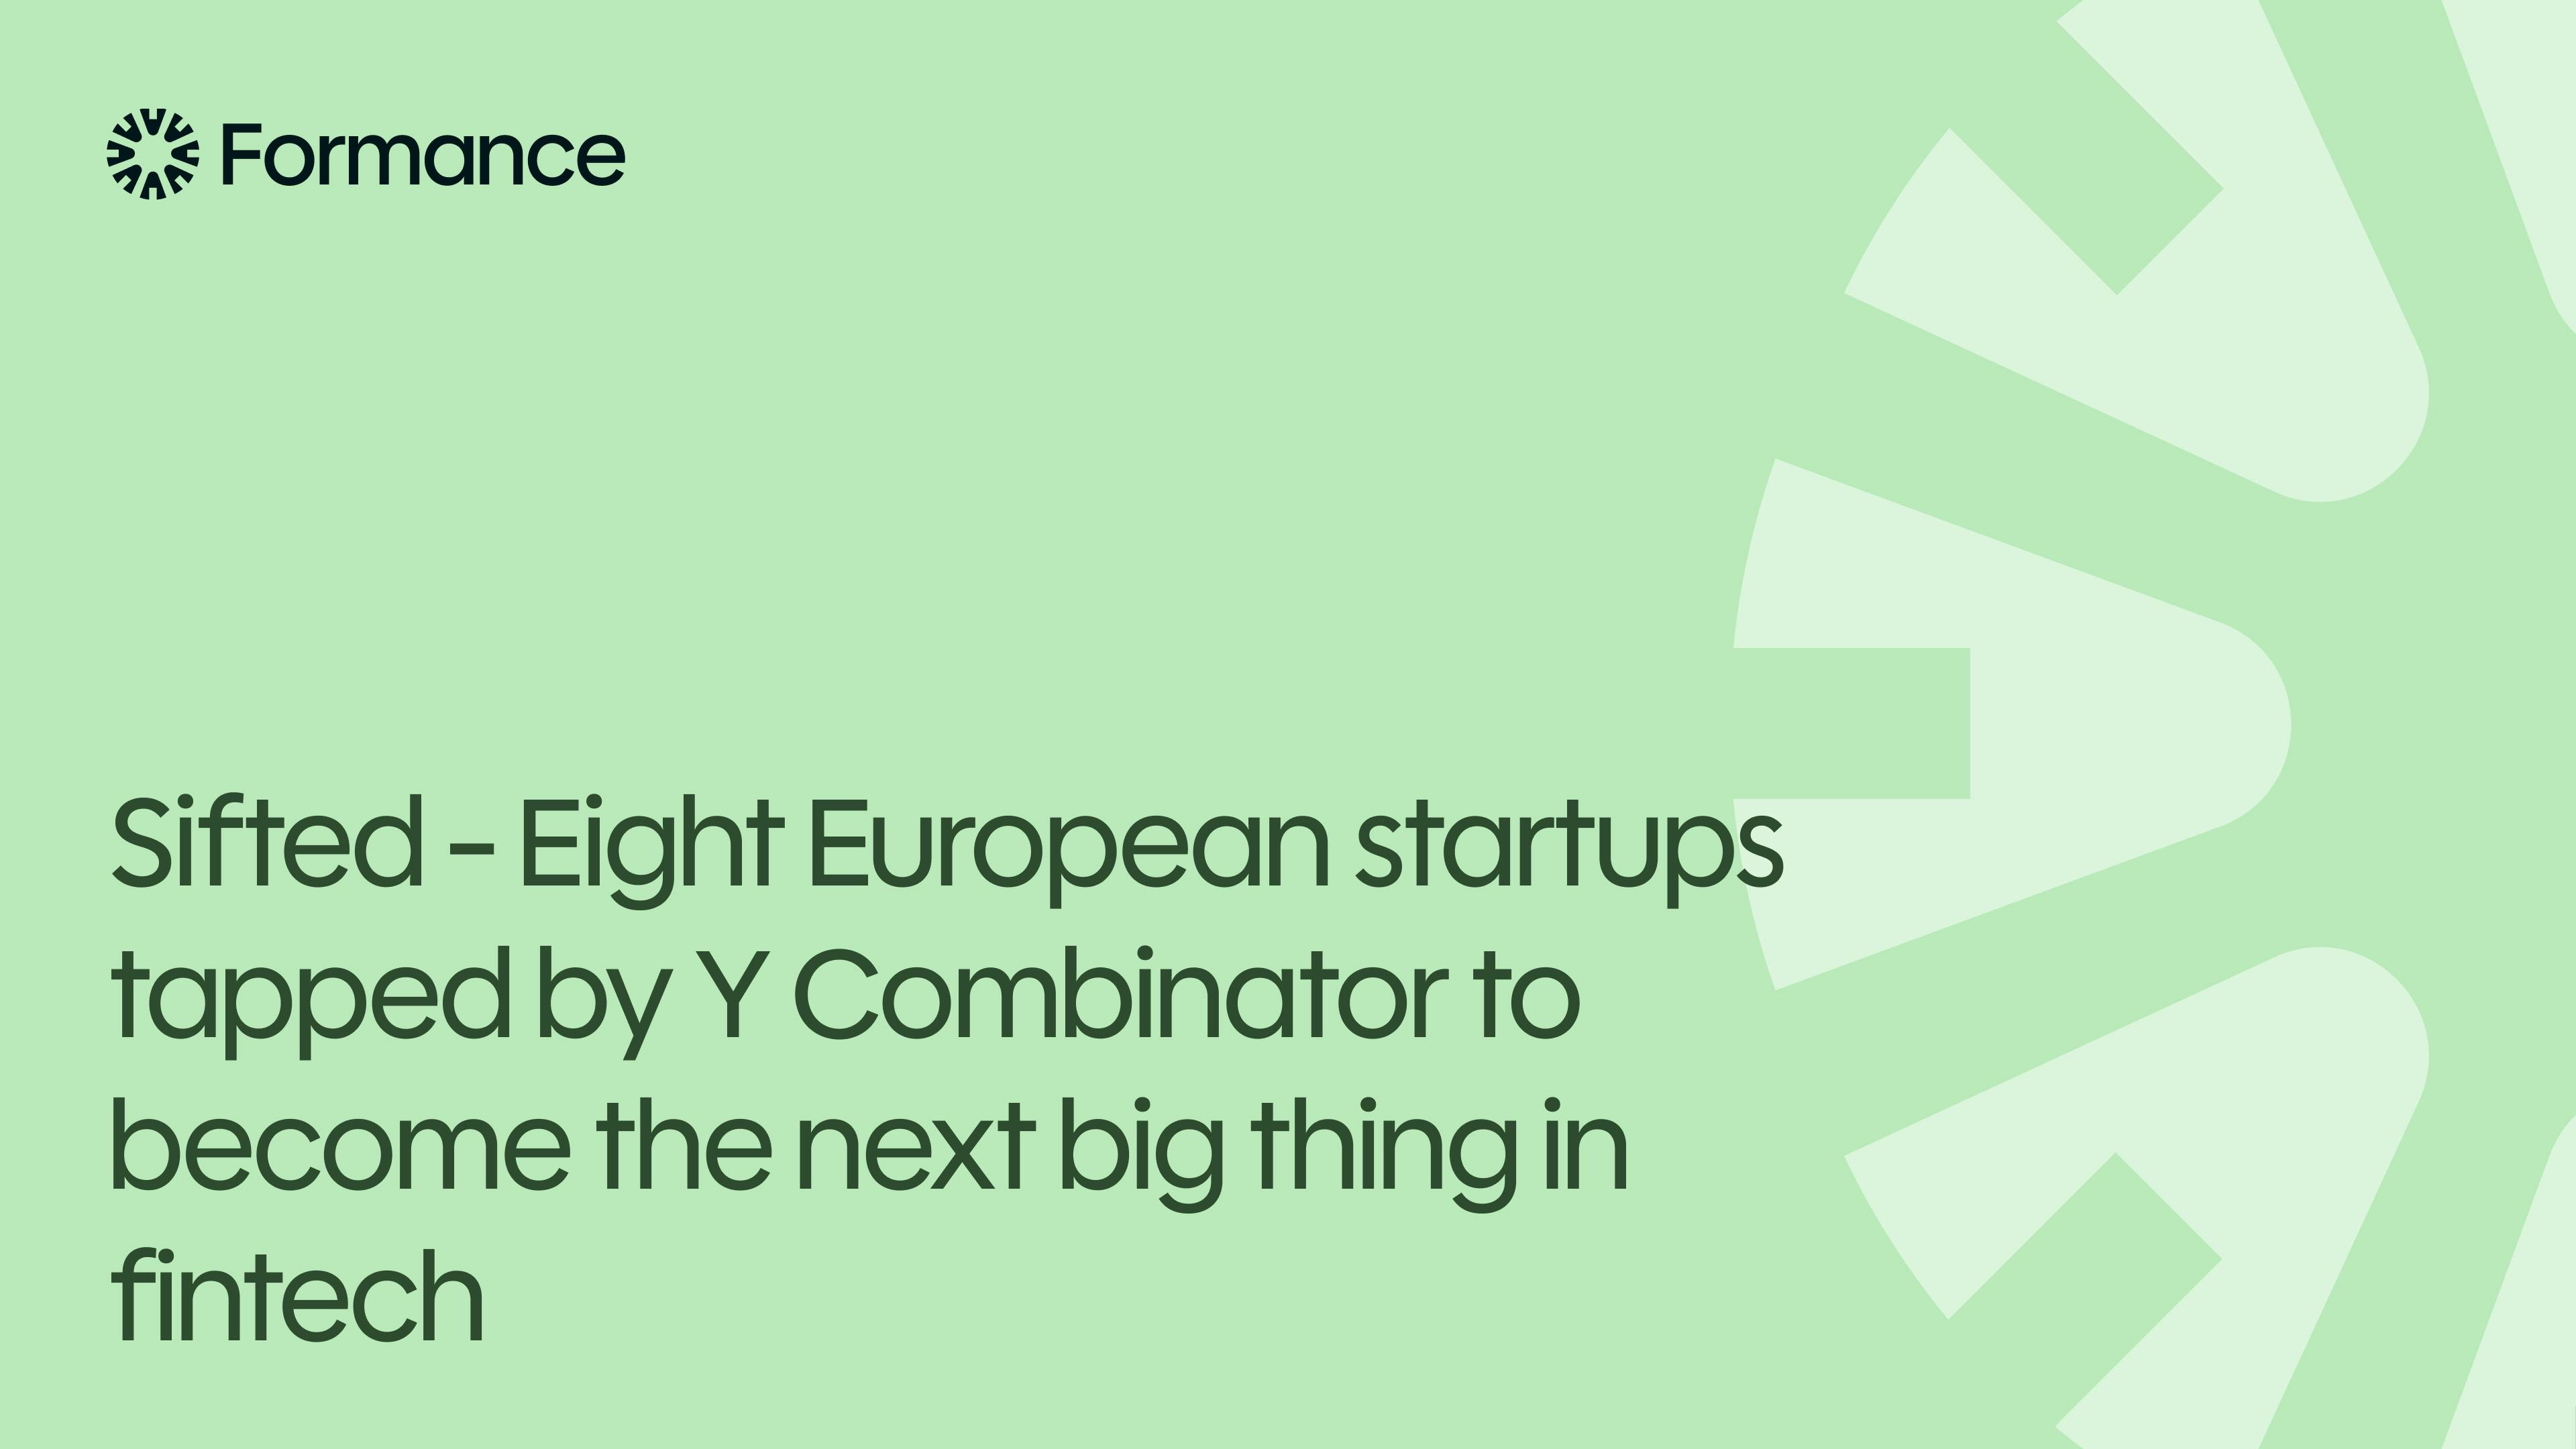 sifted-eight-european-startups-tapped-by-y-combinator-to-become-the-next-big-thing-in-fintech-cover